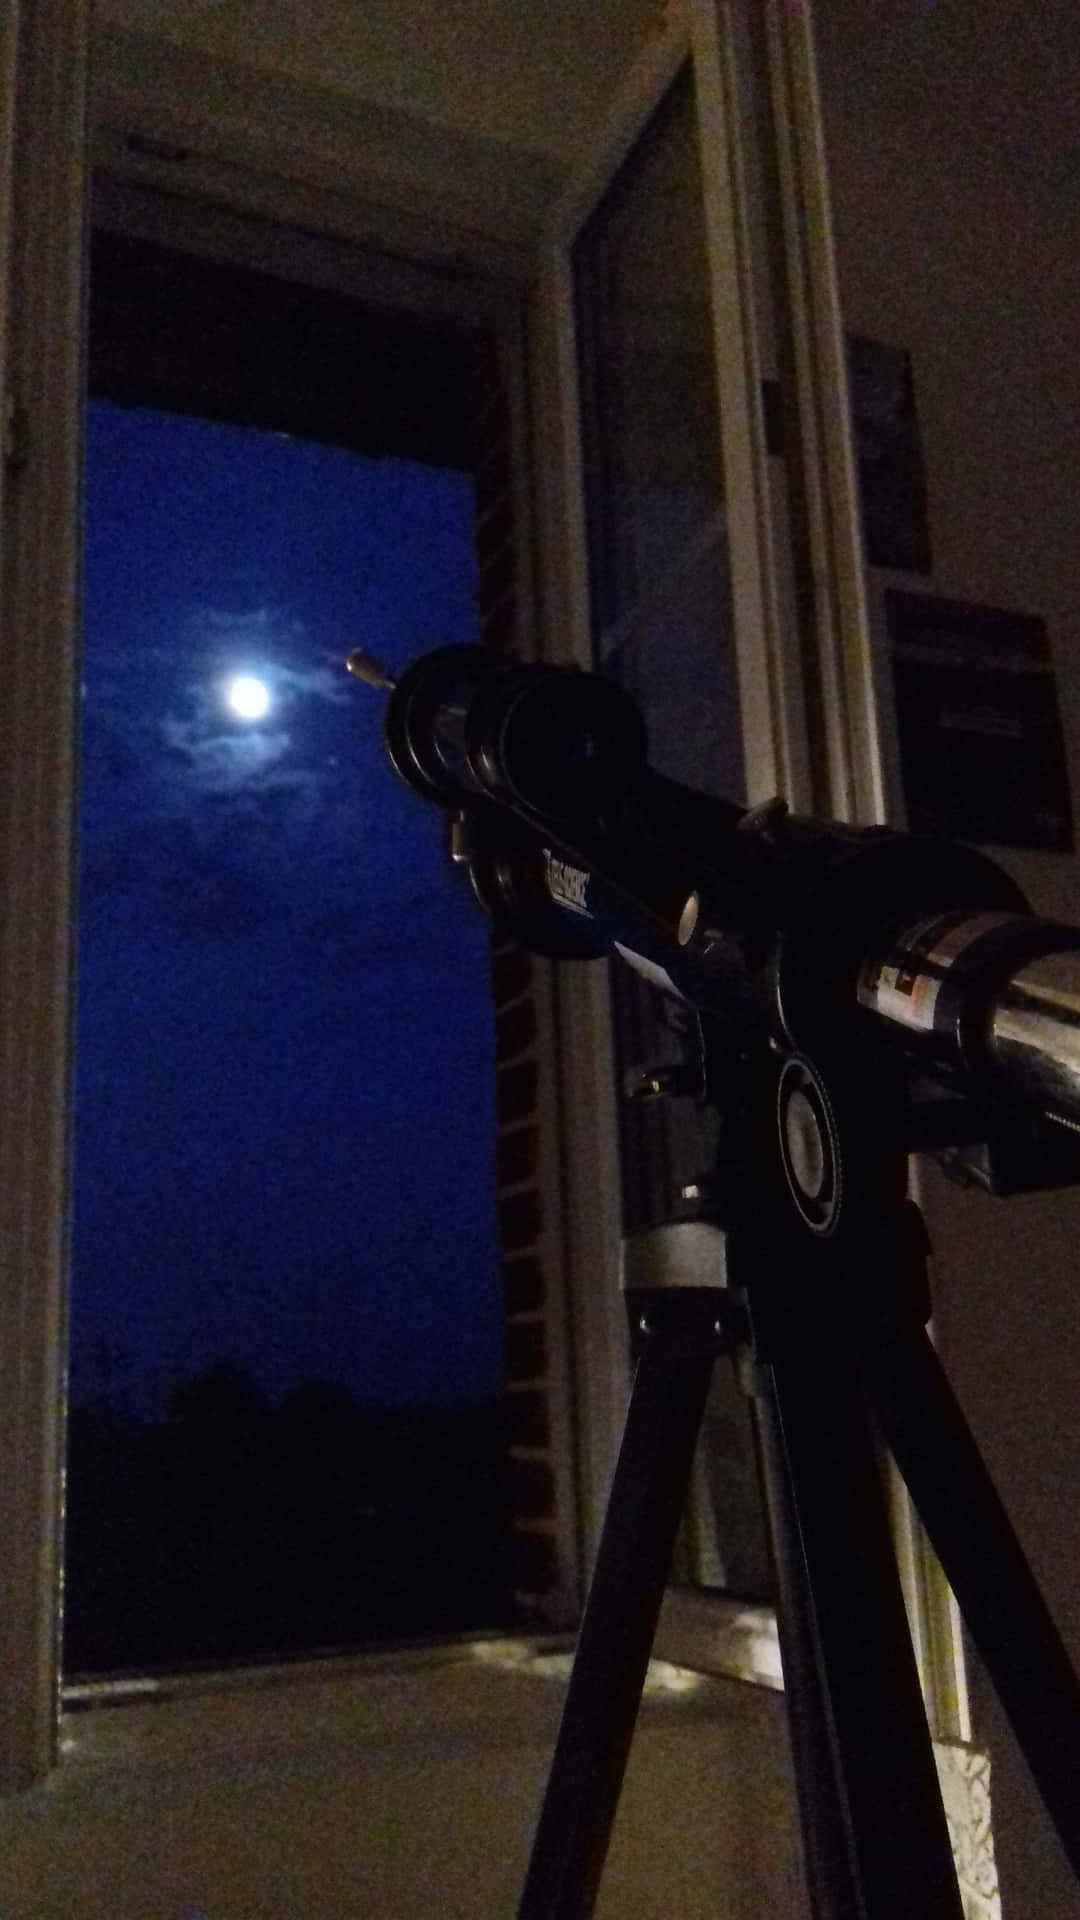 Taking in the wonders of the night sky with a Telescope